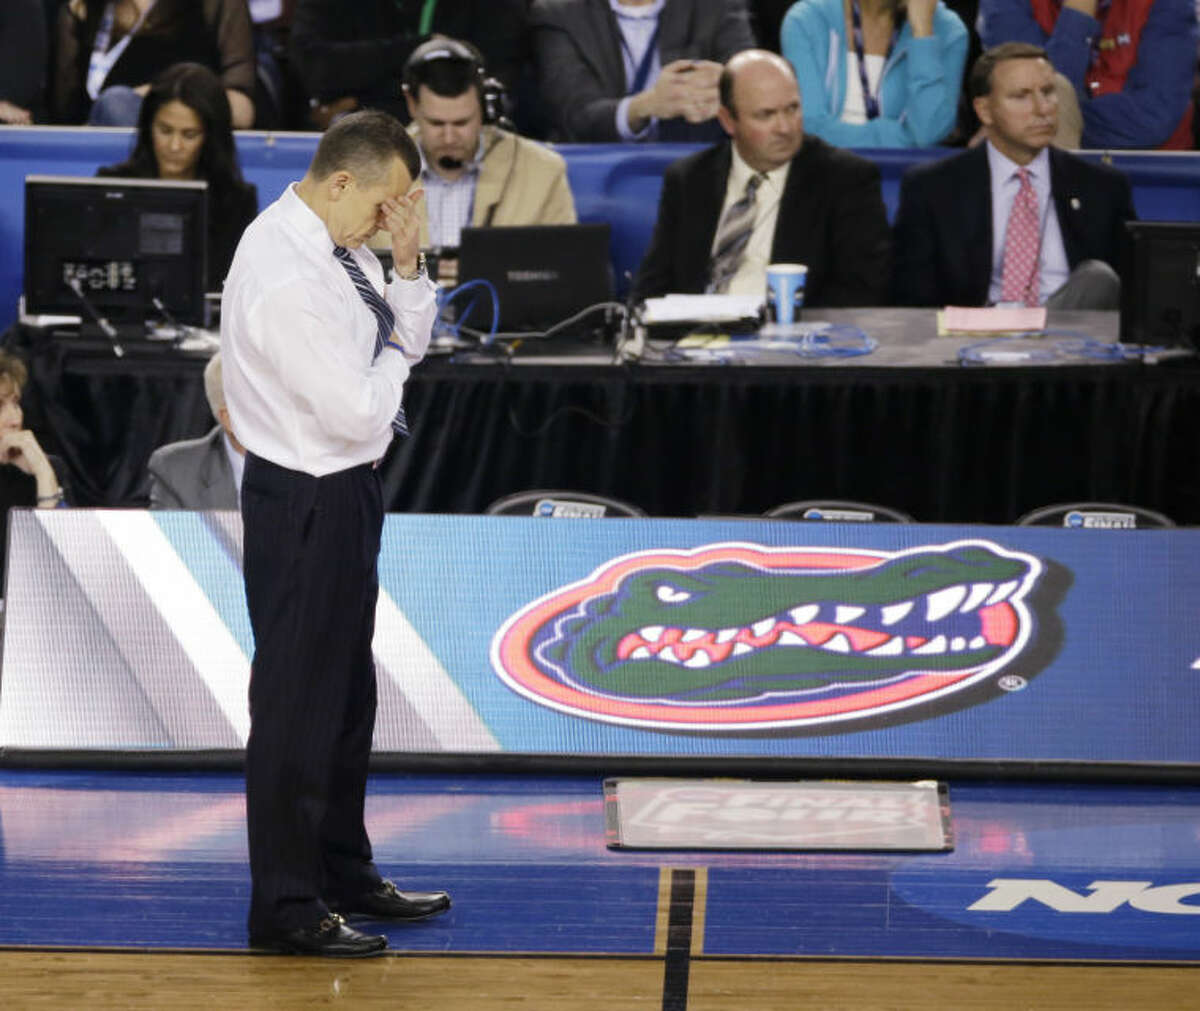 Florida head coach Billy Donovan reacts during the second half of an NCAA Final Four tournament college basketball semifinal game against Connecticut Saturday, April 5, 2014, in Arlington, Texas. Connecticut won 63-53. (AP Photo/Tony Gutierrez)